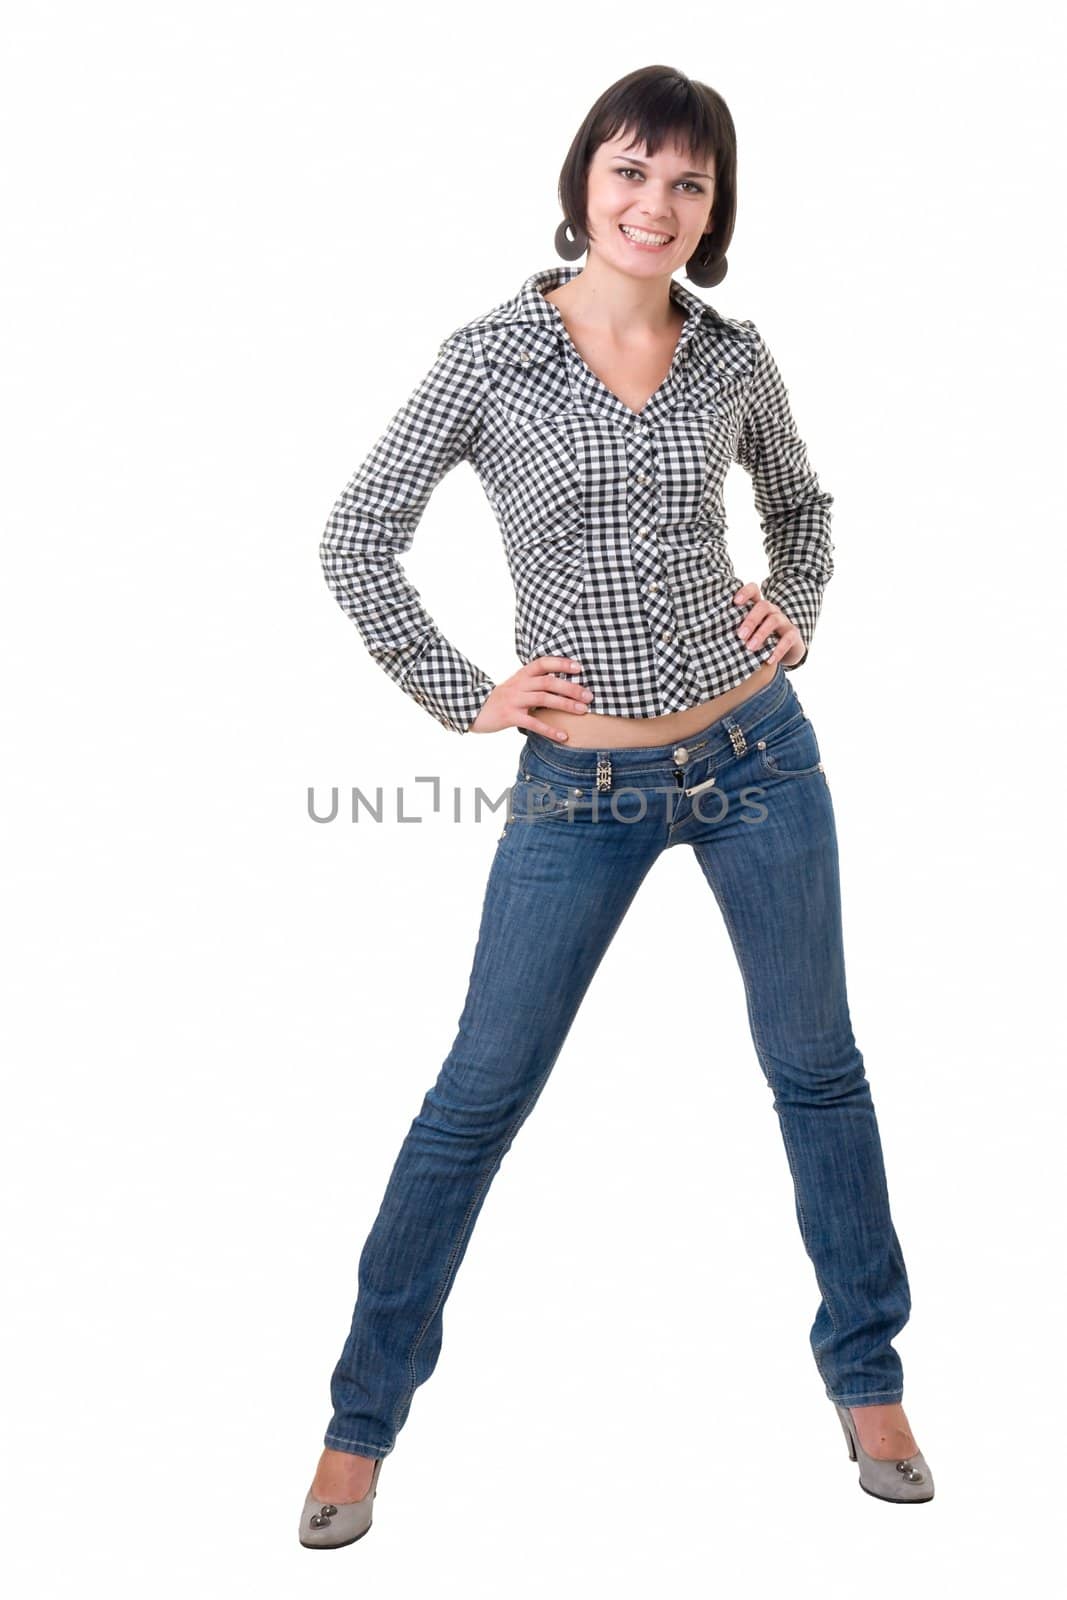 beautiful girl in jeans on a white background